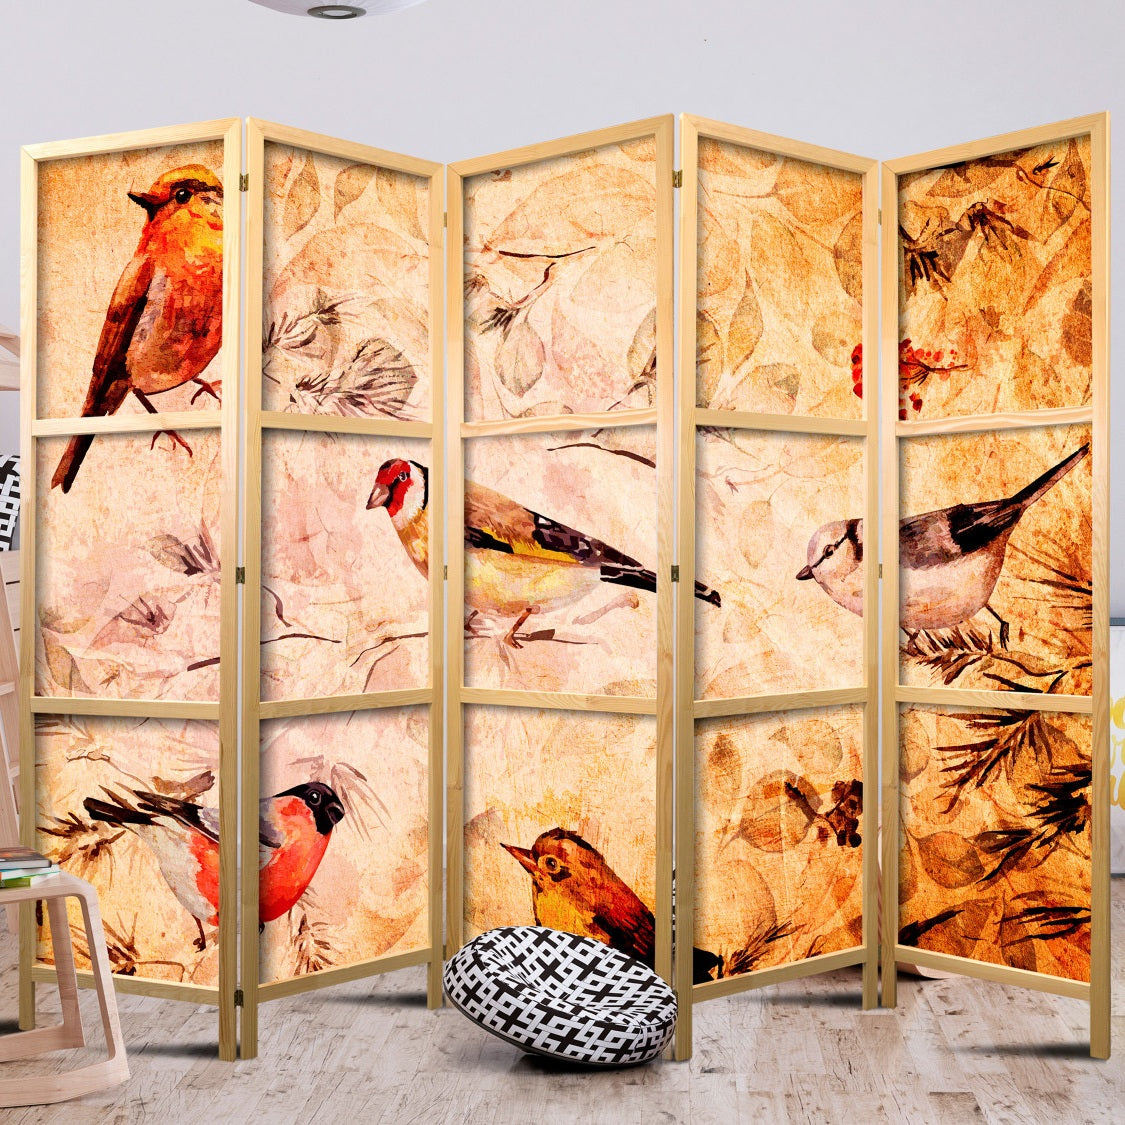 5 panels shoji screen with birds printed on it canvas